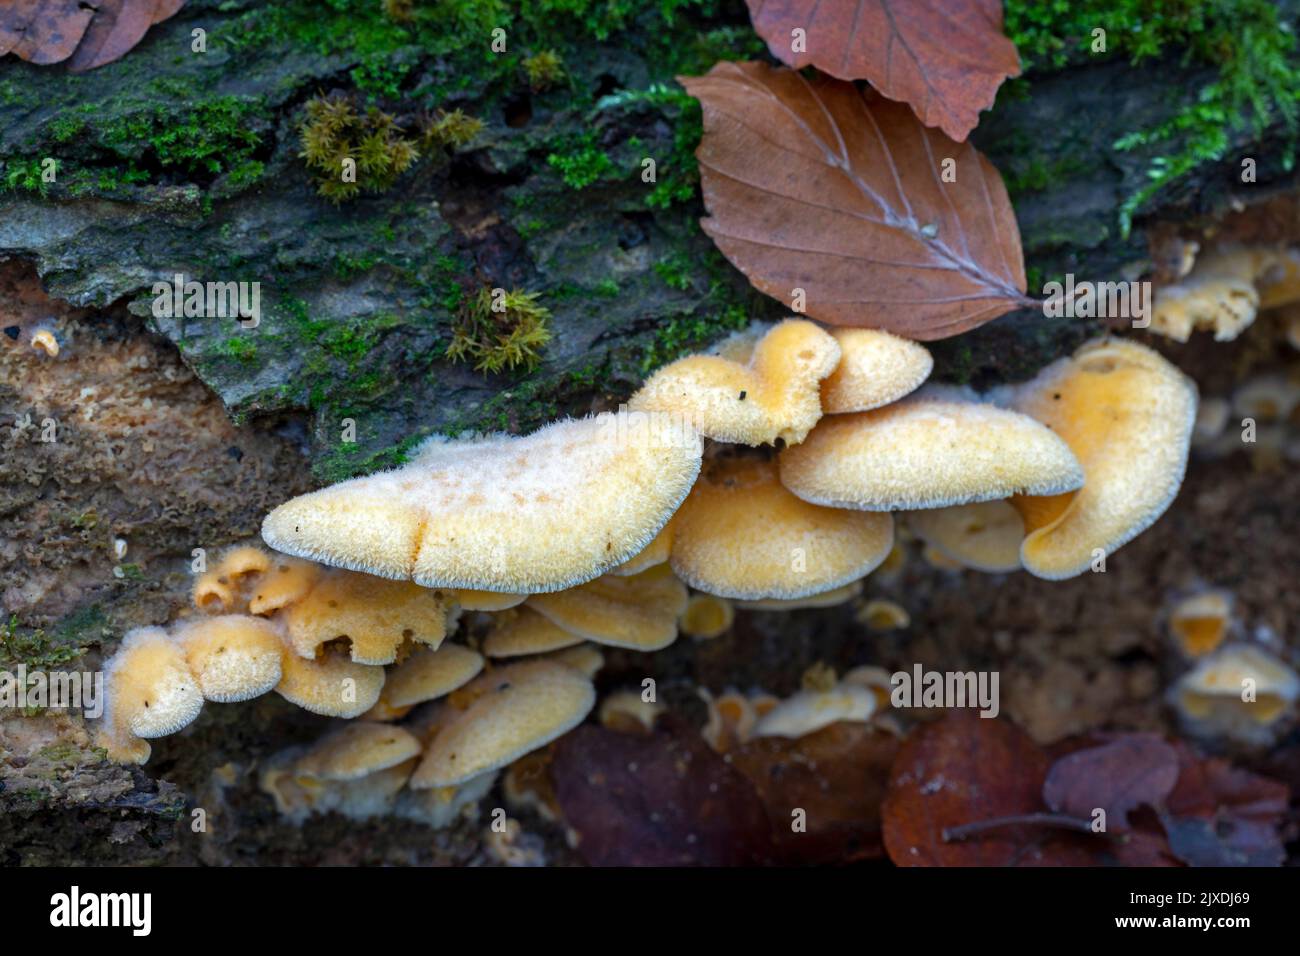 Orange Oyster, Mock Oyster (Phyllotopsis nidulans) on the trunk of a decaying Common Beech. Germany Stock Photo